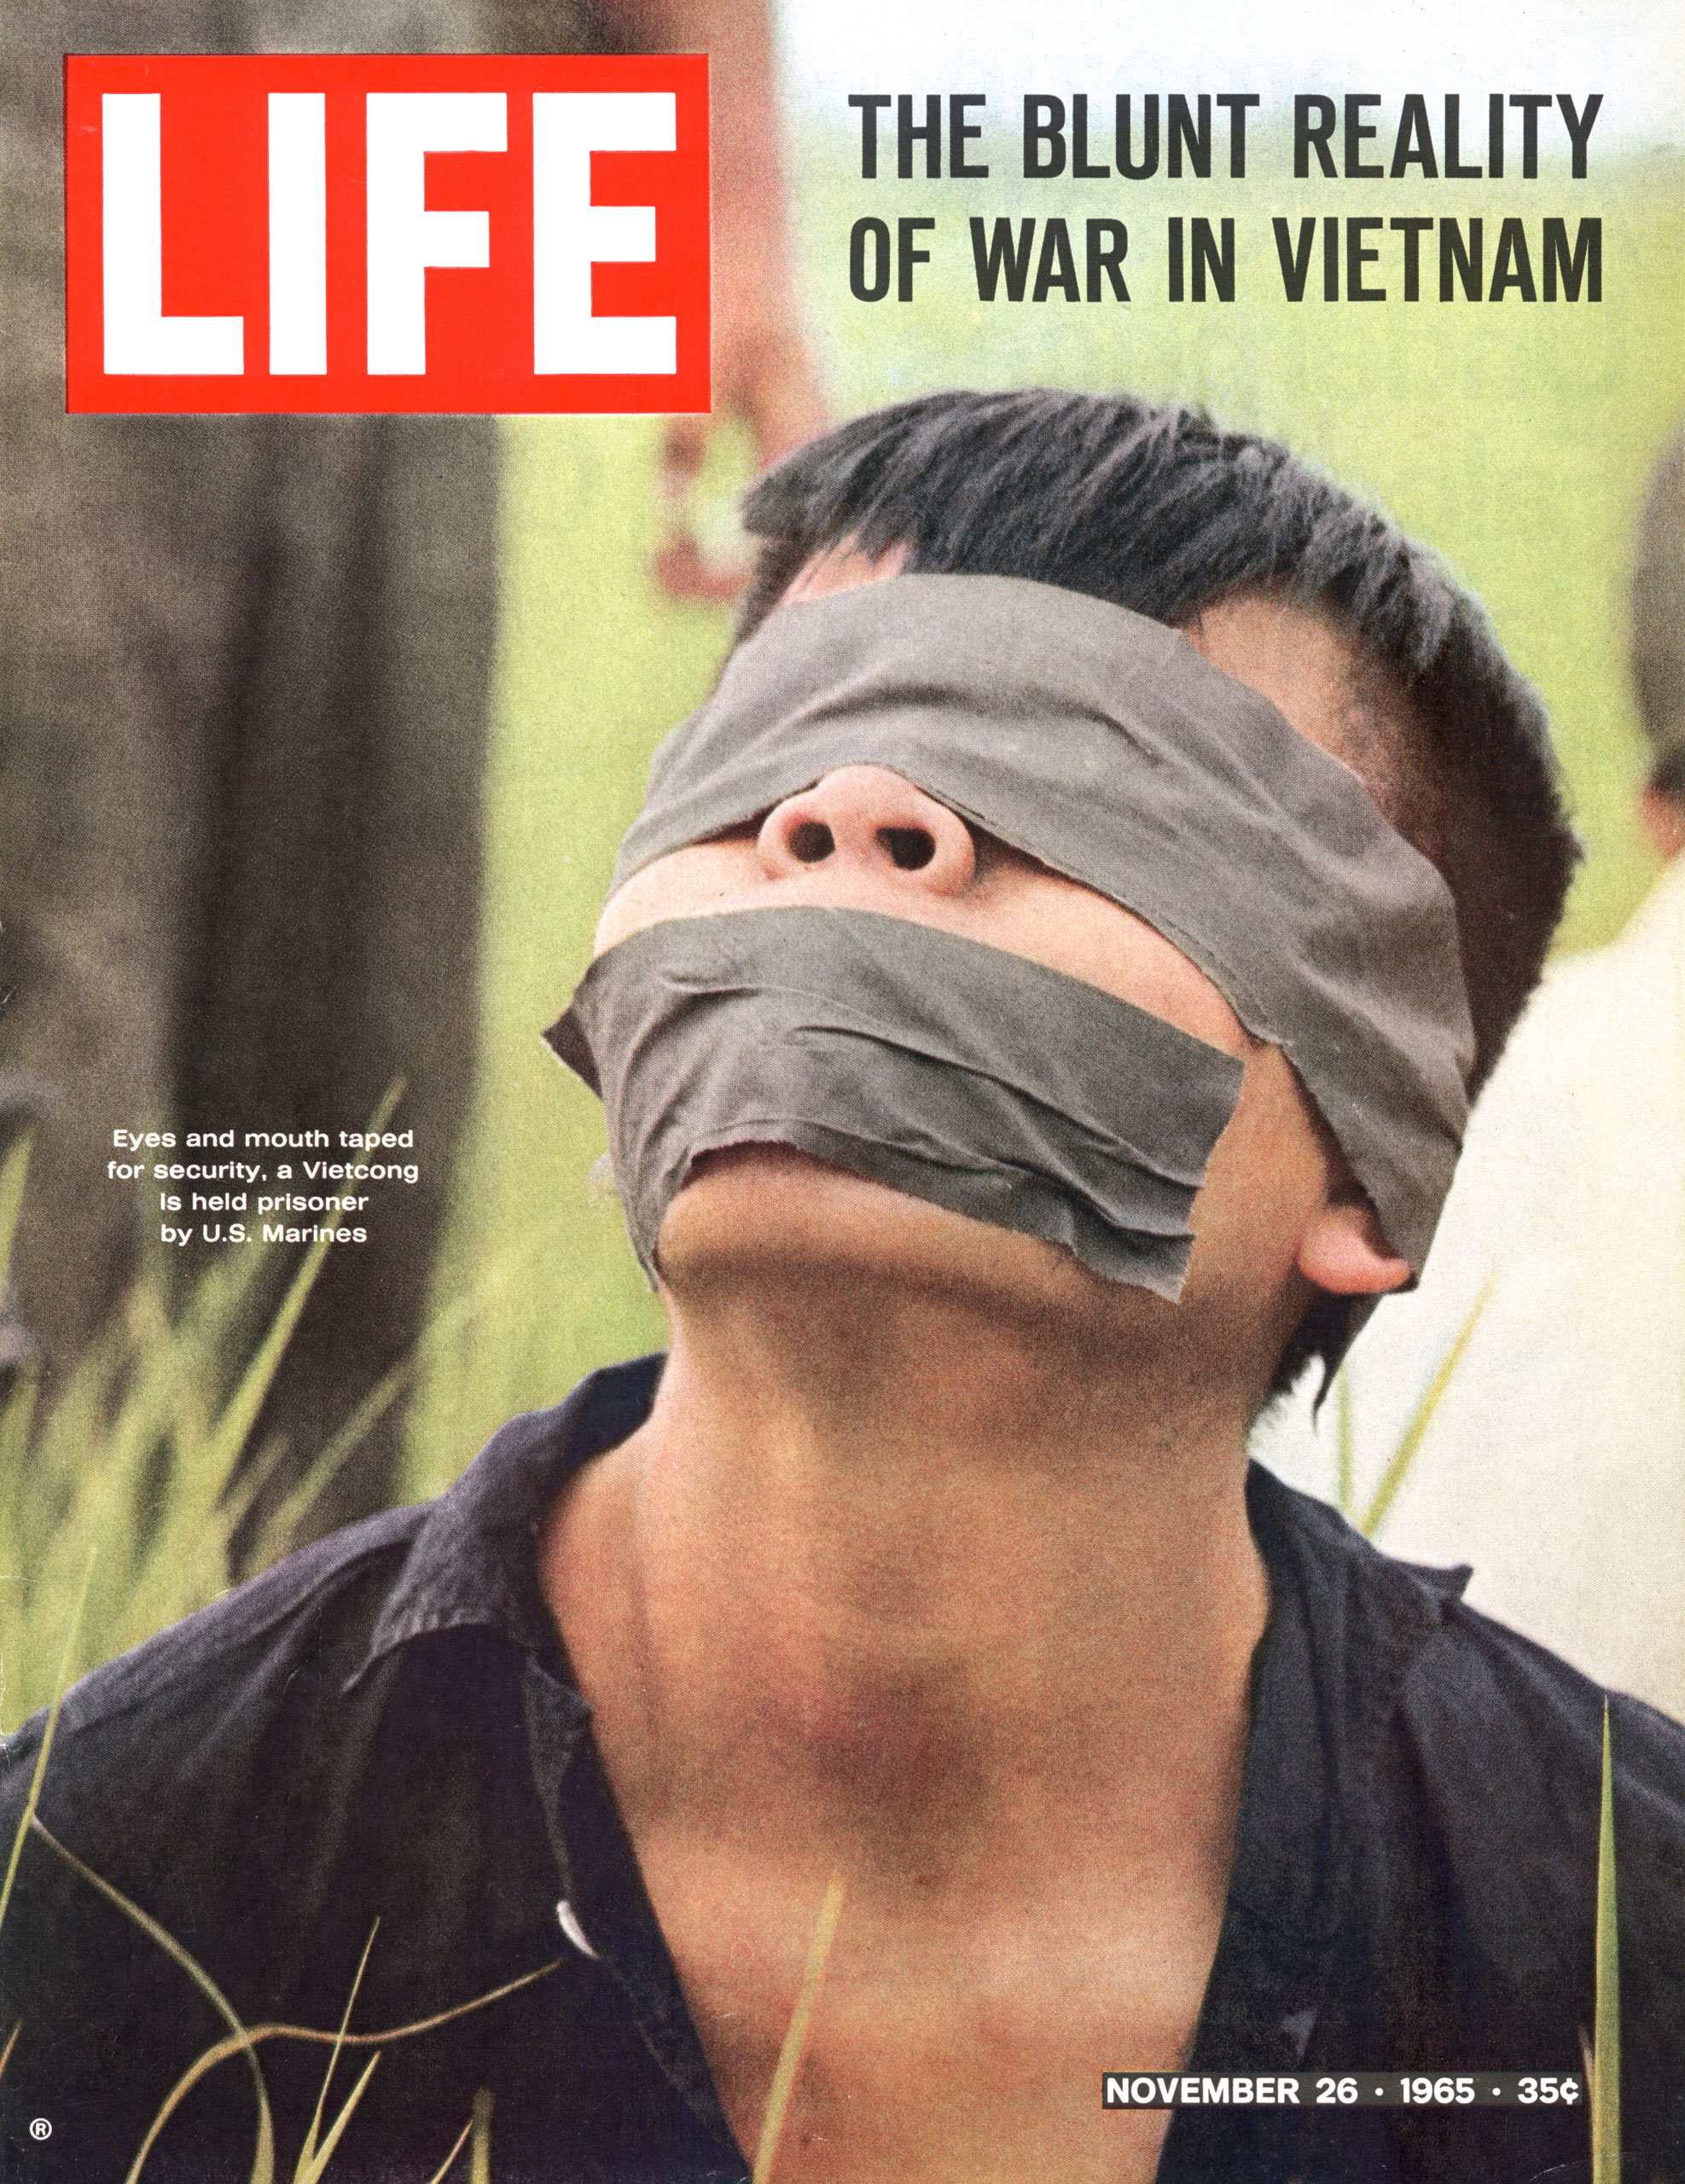 Eyes and mouth taped for security, a Vietcong is held prisoner by U.S. Marines.